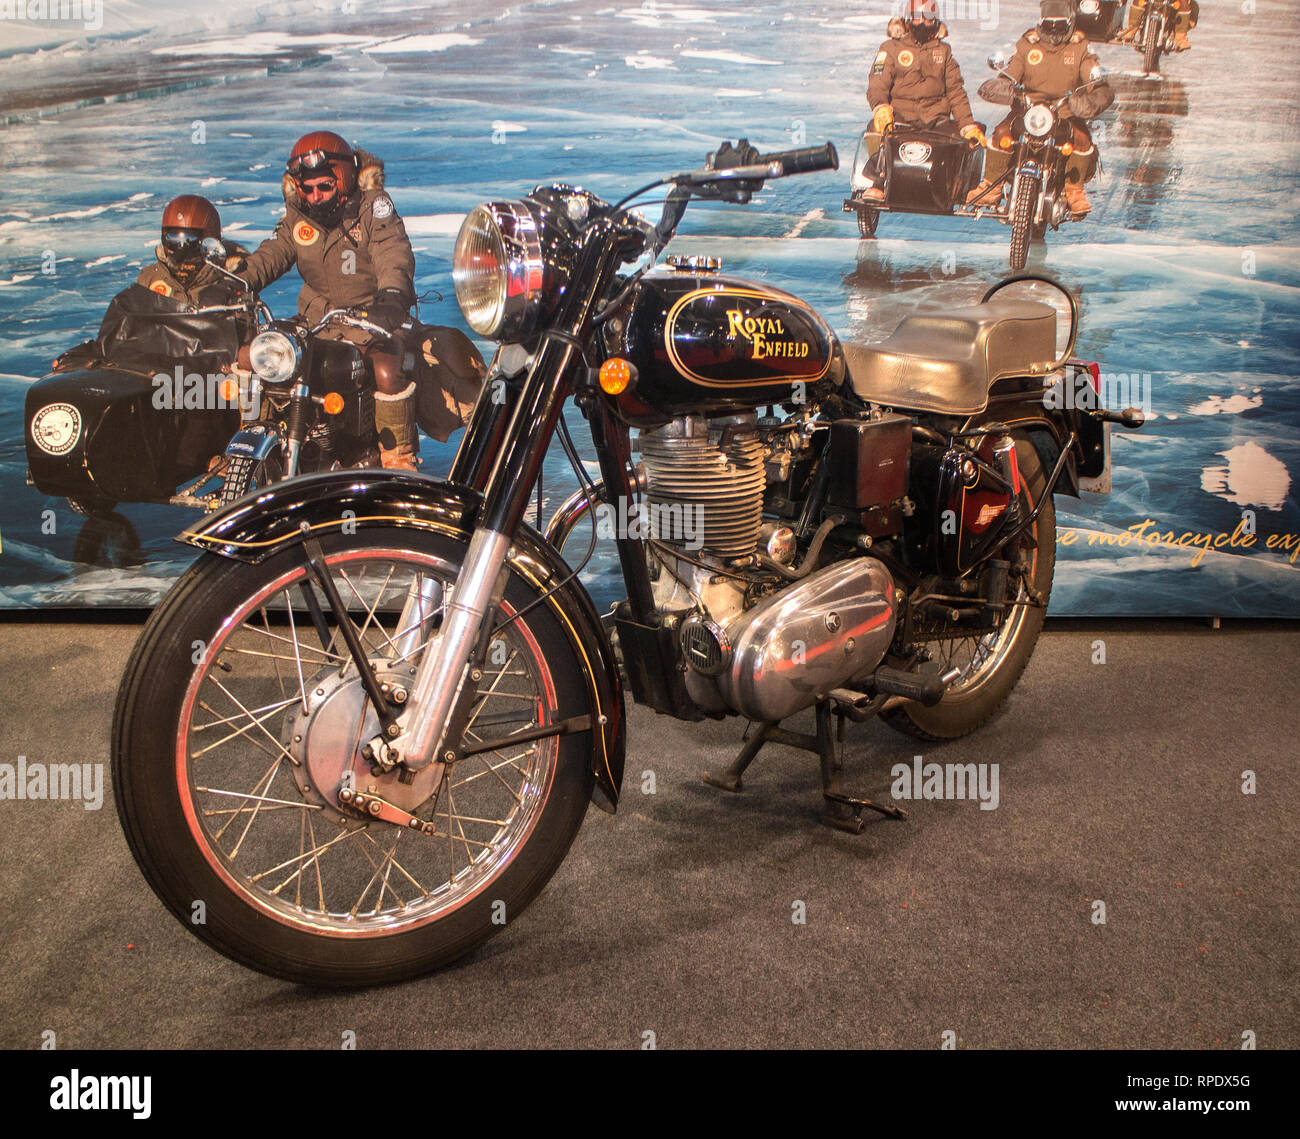 A vintage Royal Enfield at the London Motorcycle Show 2019 Stock Photo